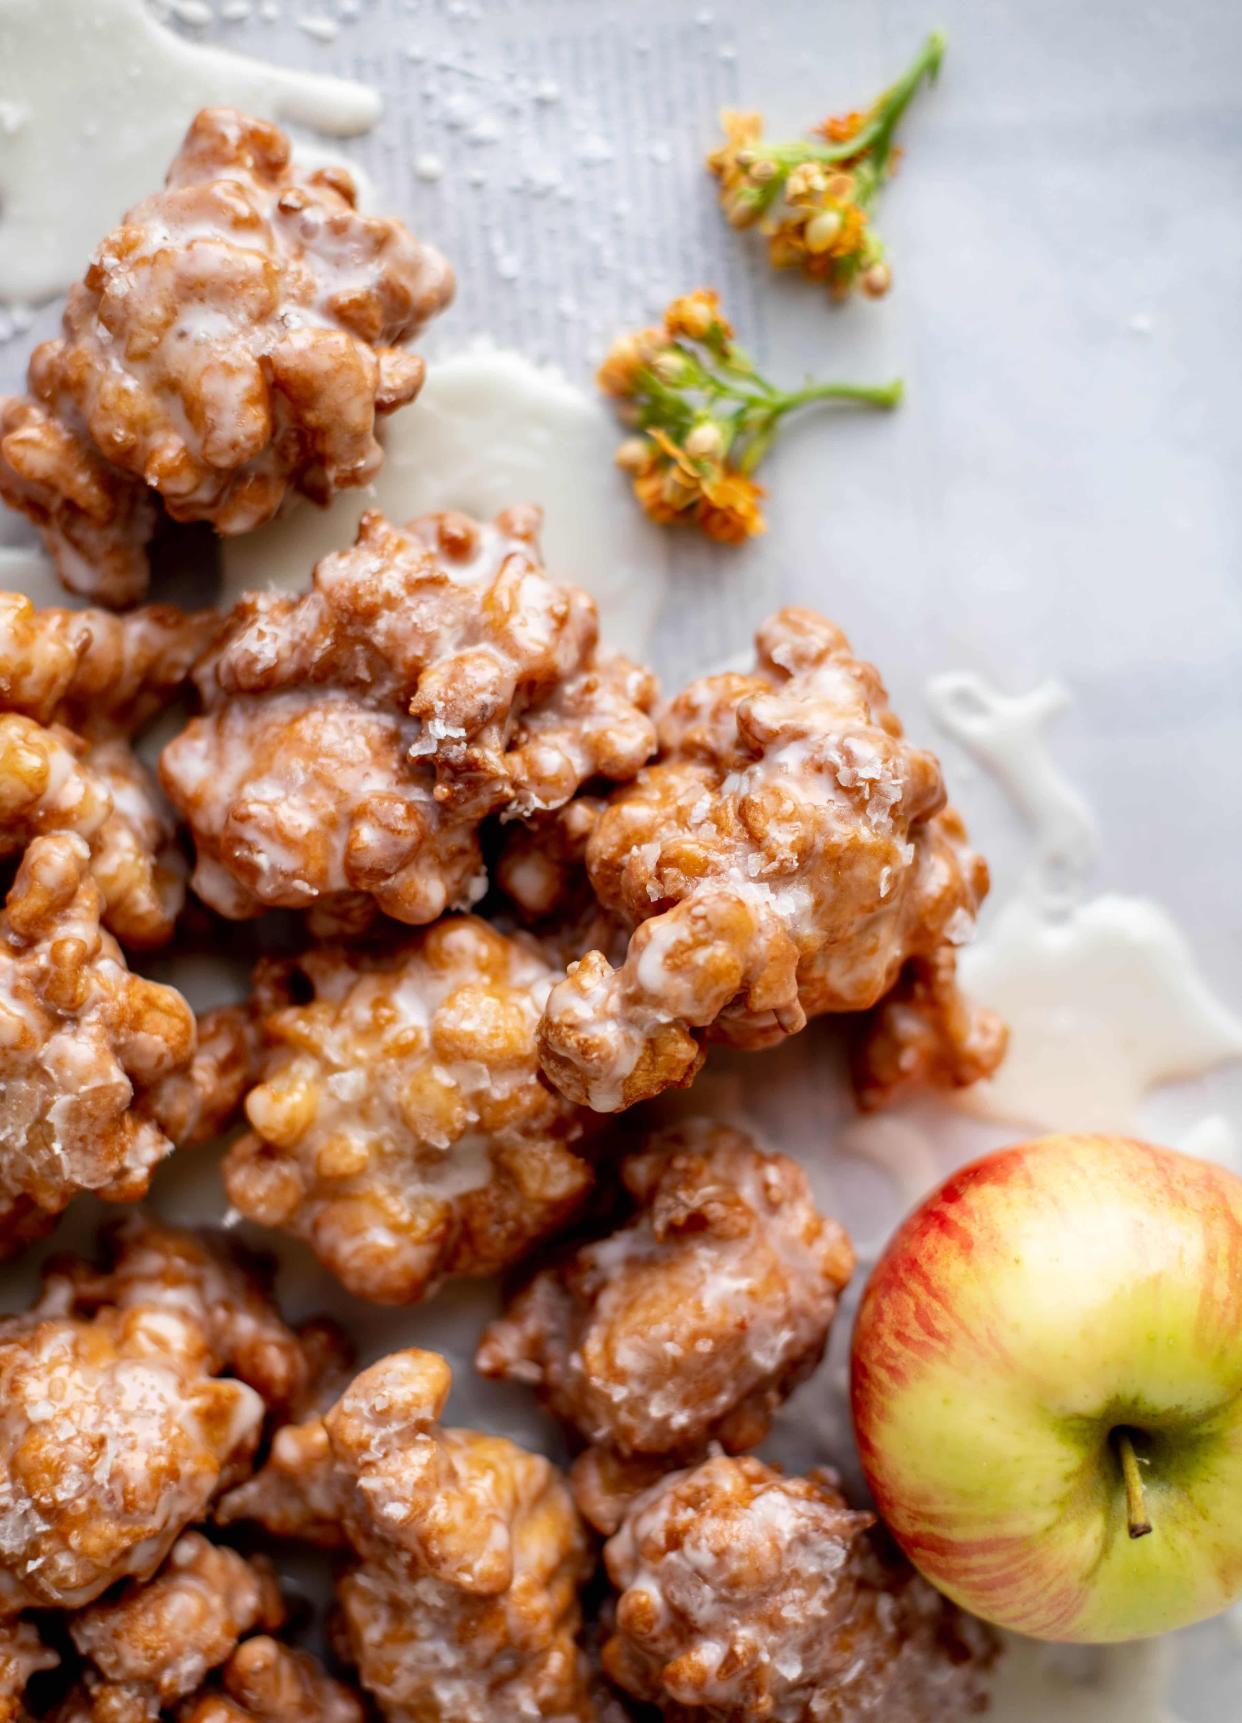 <strong><a href="https://www.howsweeteats.com/2019/09/salted-apple-fritters/" target="_blank" rel="noopener noreferrer">Get the Salted Honeycrisp Fritters recipe from How Sweet Eats</a>  </strong>